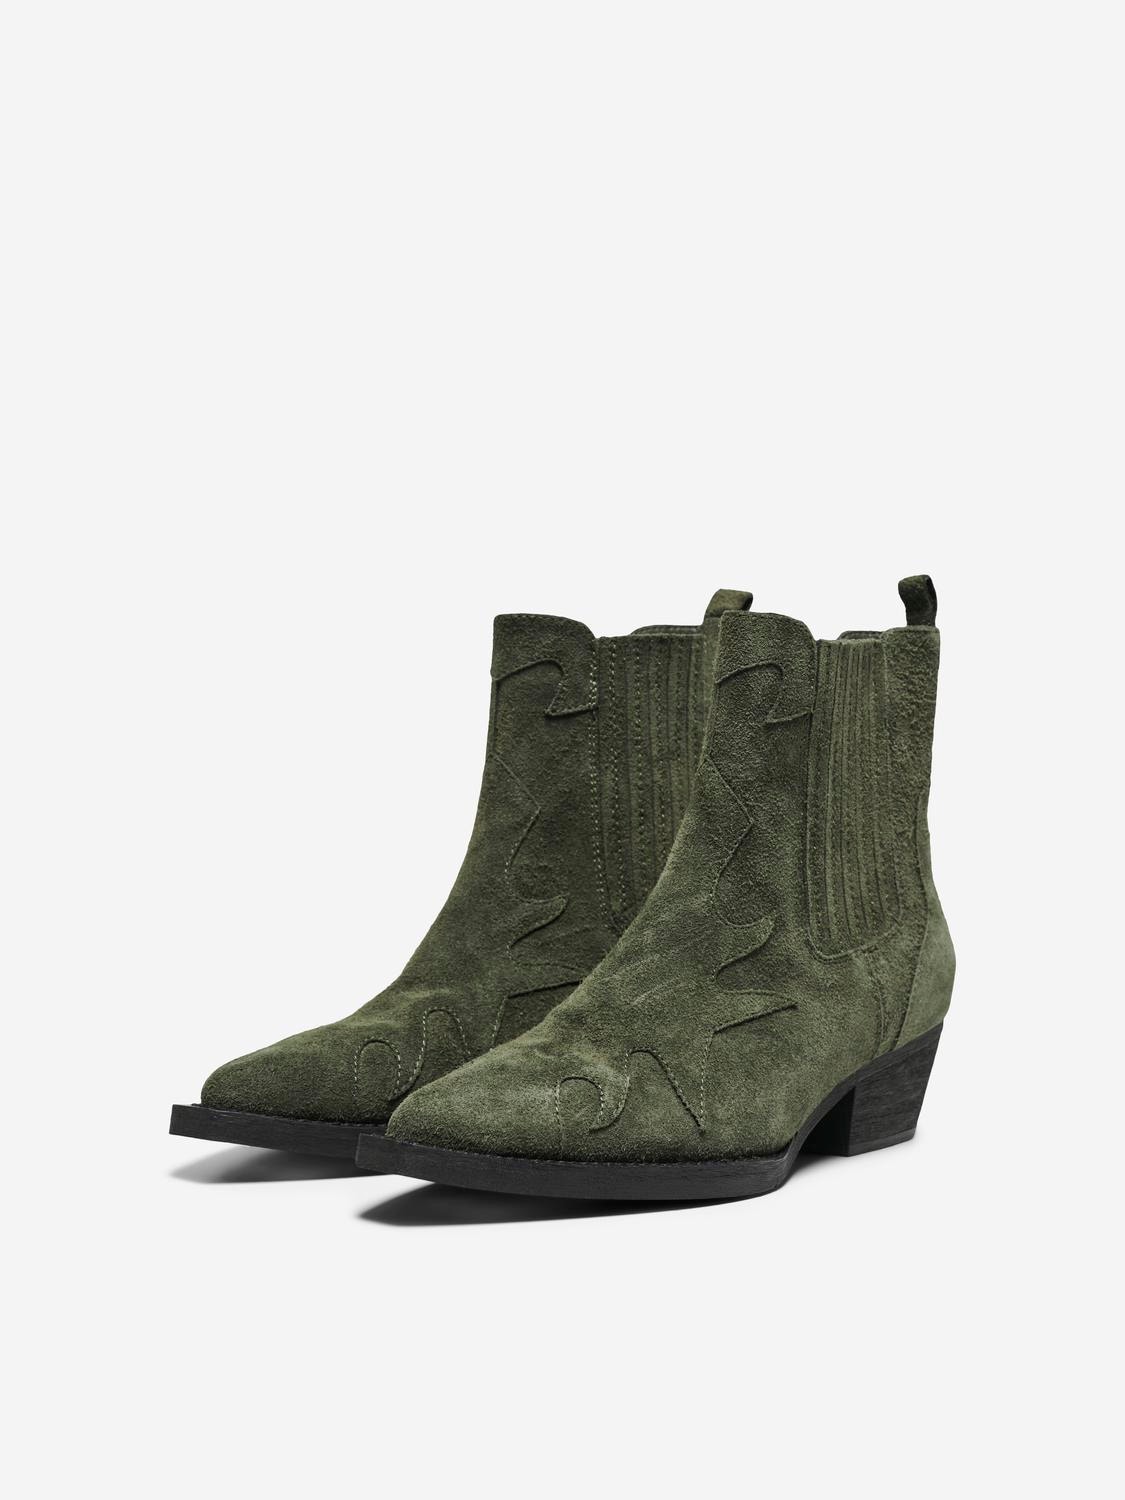 ONLY Skinn Boots -Green Olive - 15287492